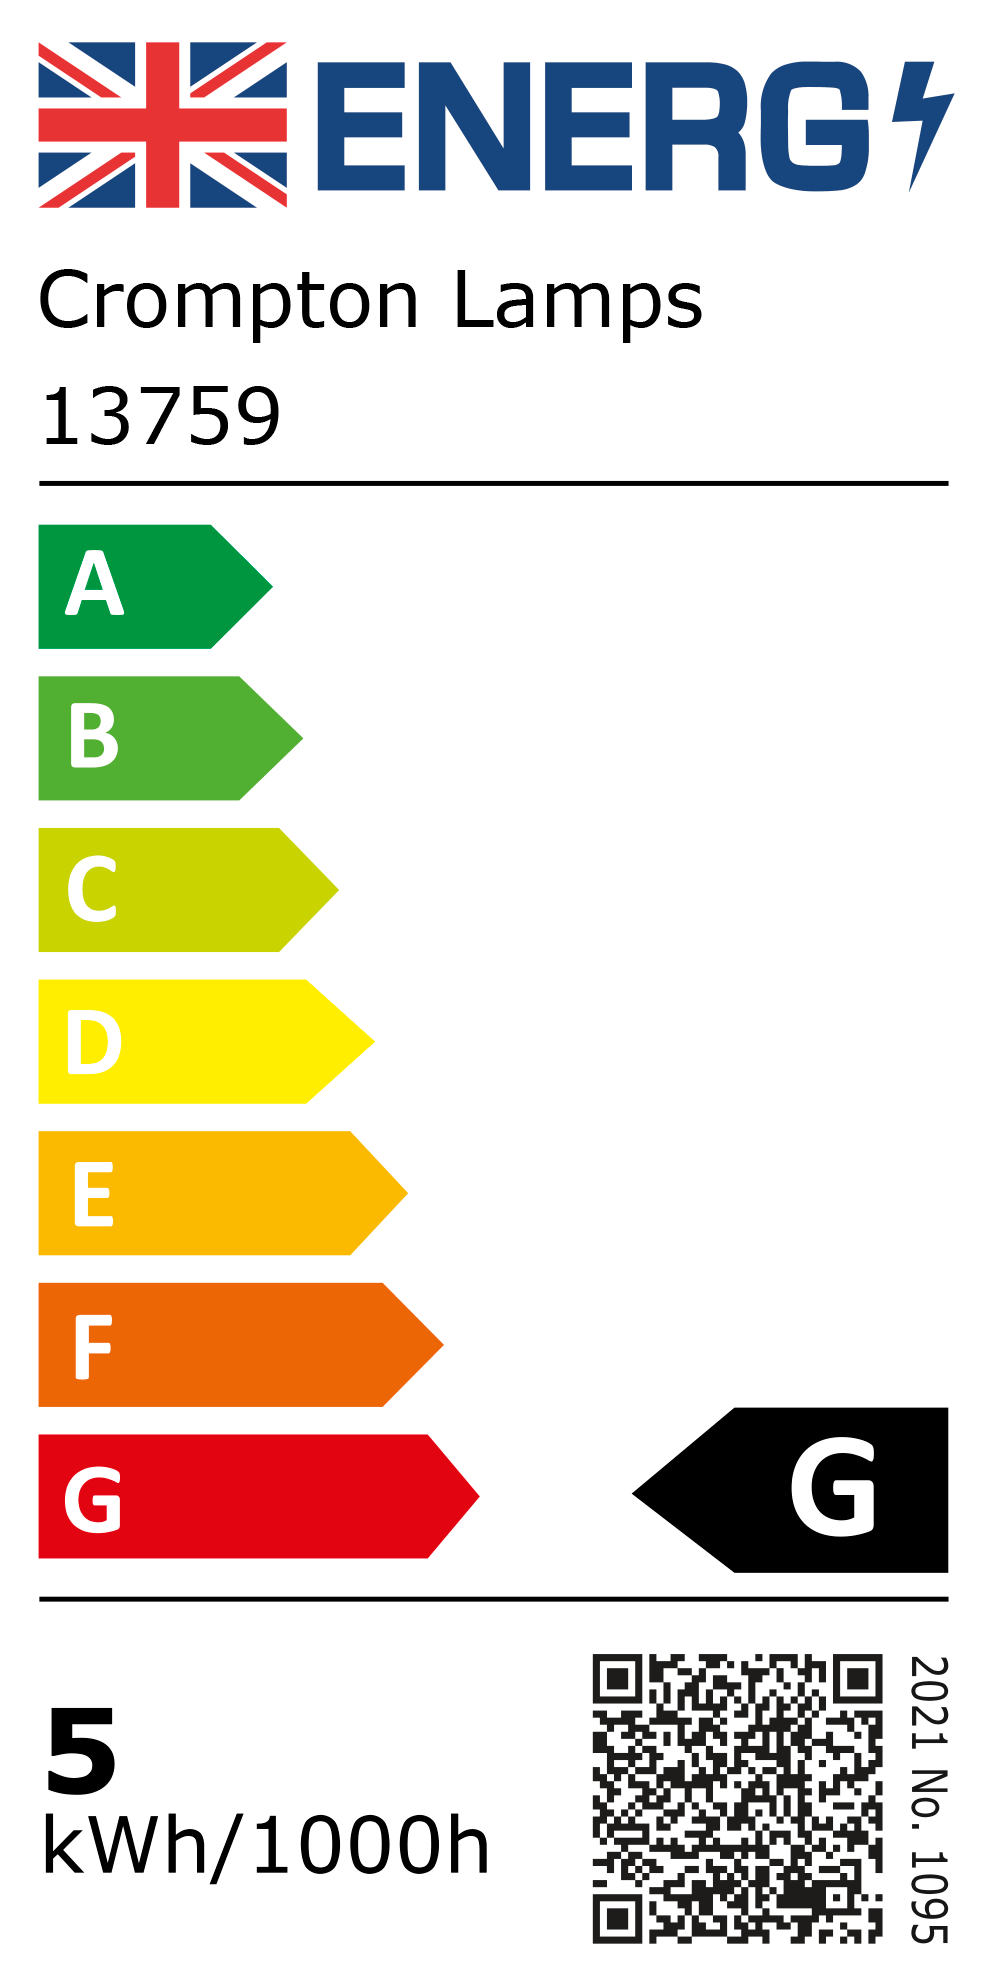 New 2021 Energy Rating Label: Stock Code 13759